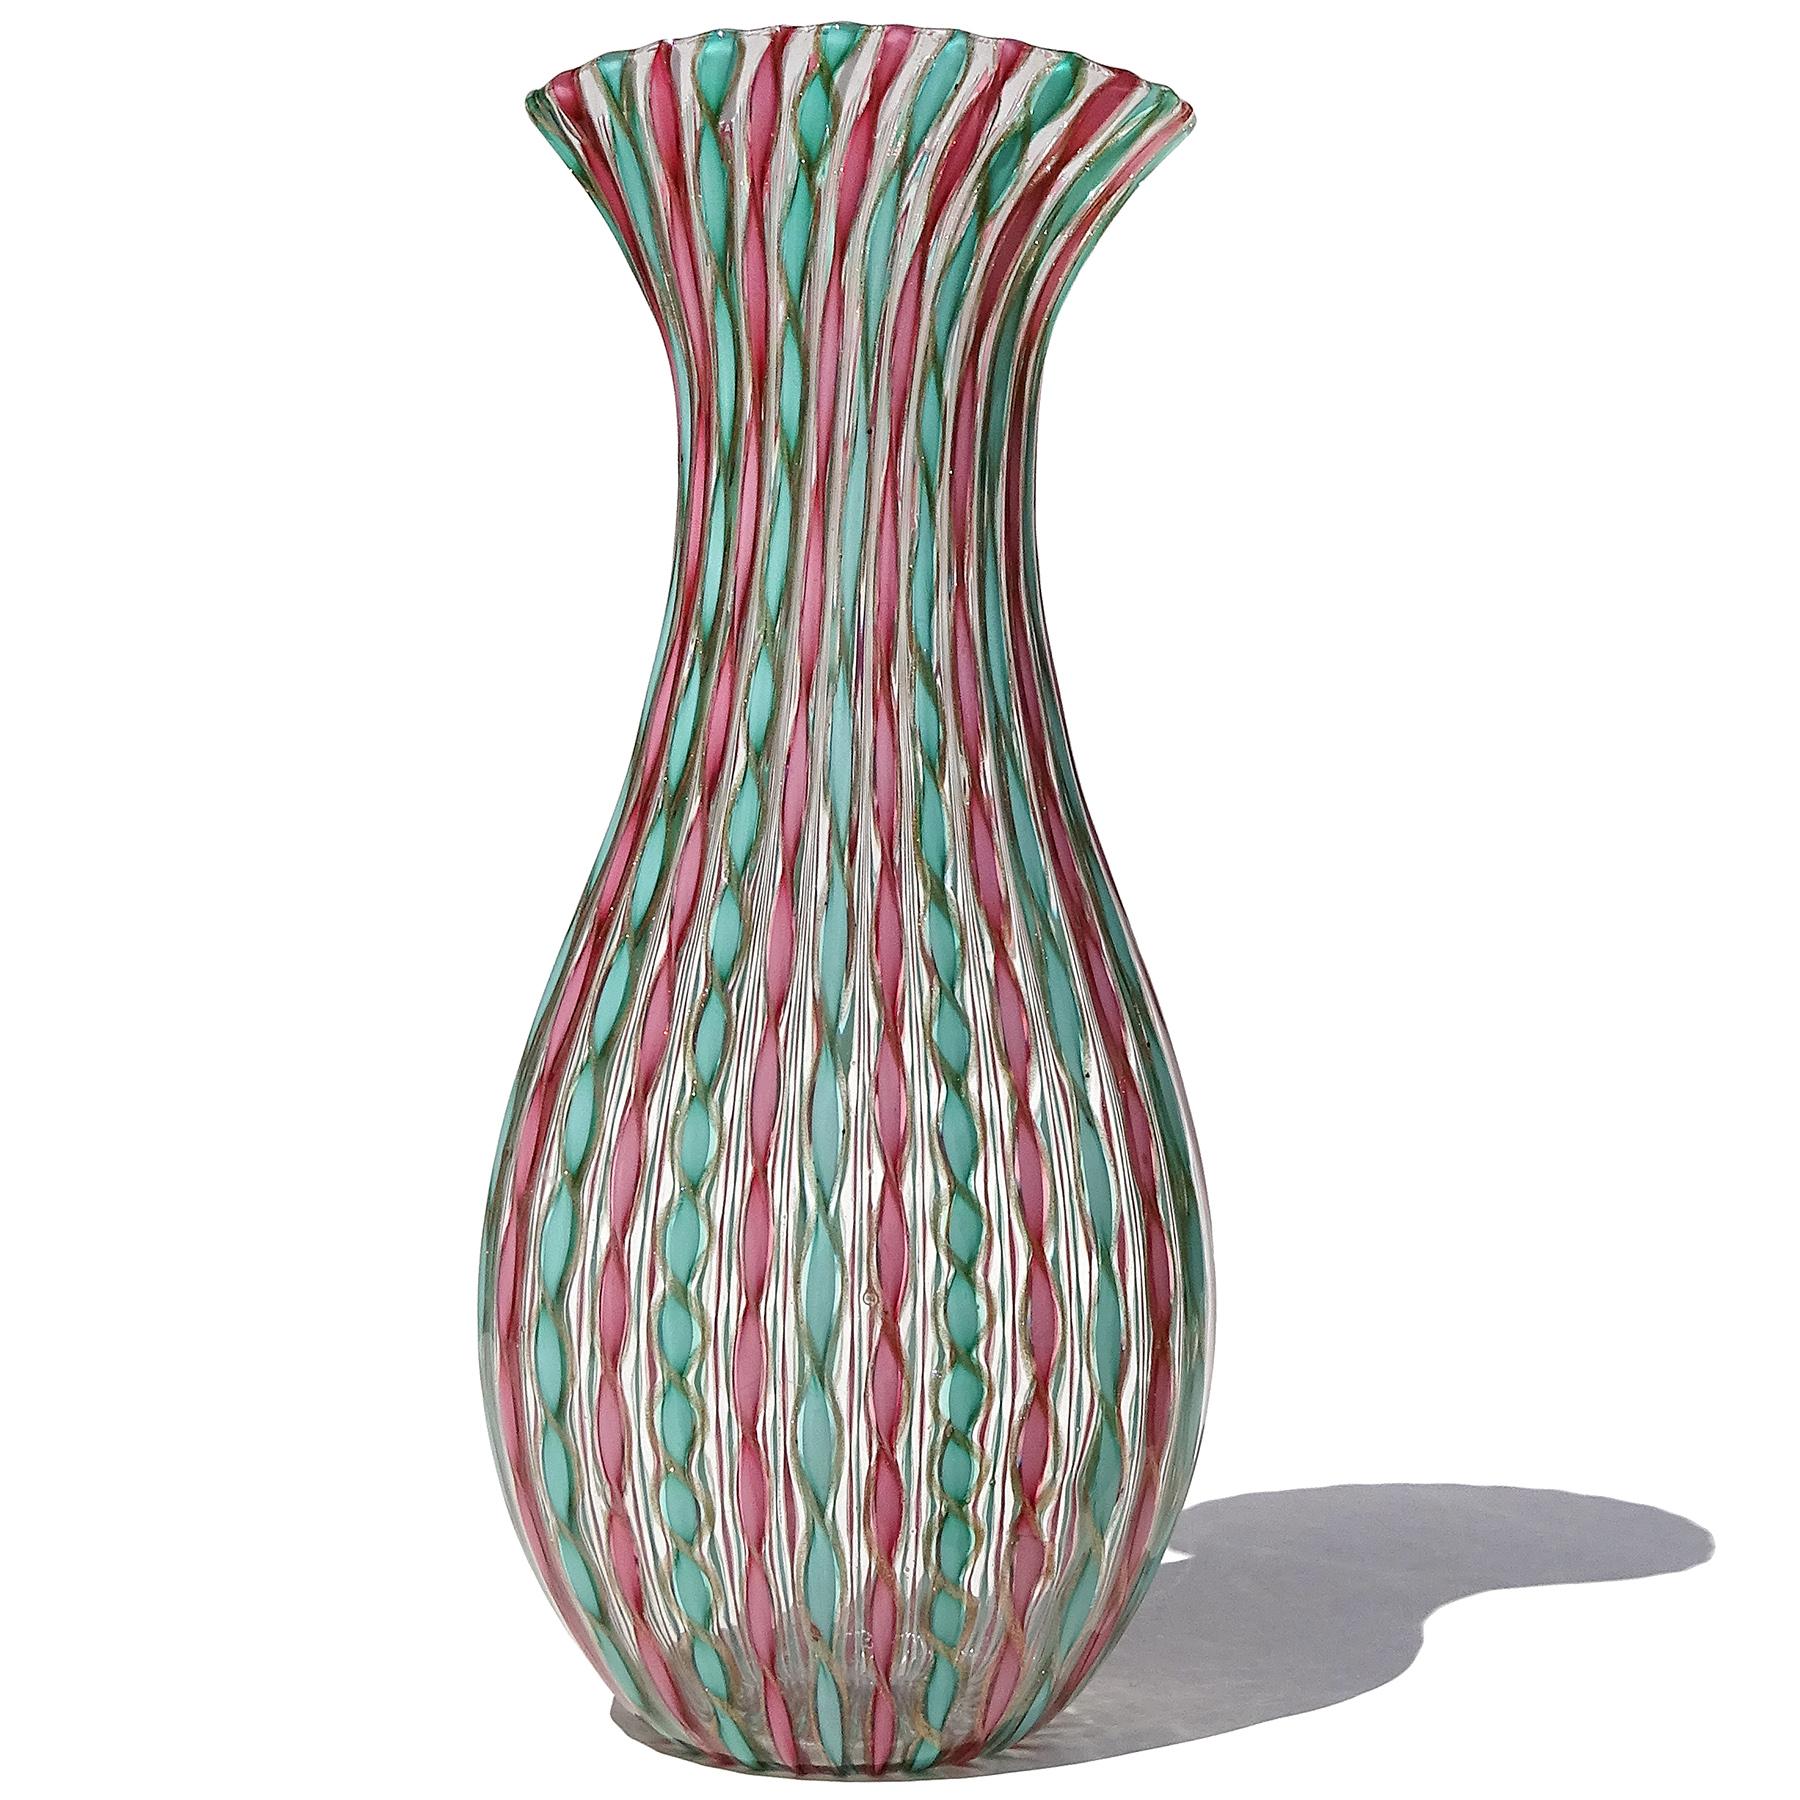 Beautiful vintage Murano hand blown teal green, pink and copper twisting ribbons Italian art glass flower vase. Created in the manner of Fratelli Toso company, and designer Dino Martens. The vase has an alternating pattern of teal and pink ribbons,